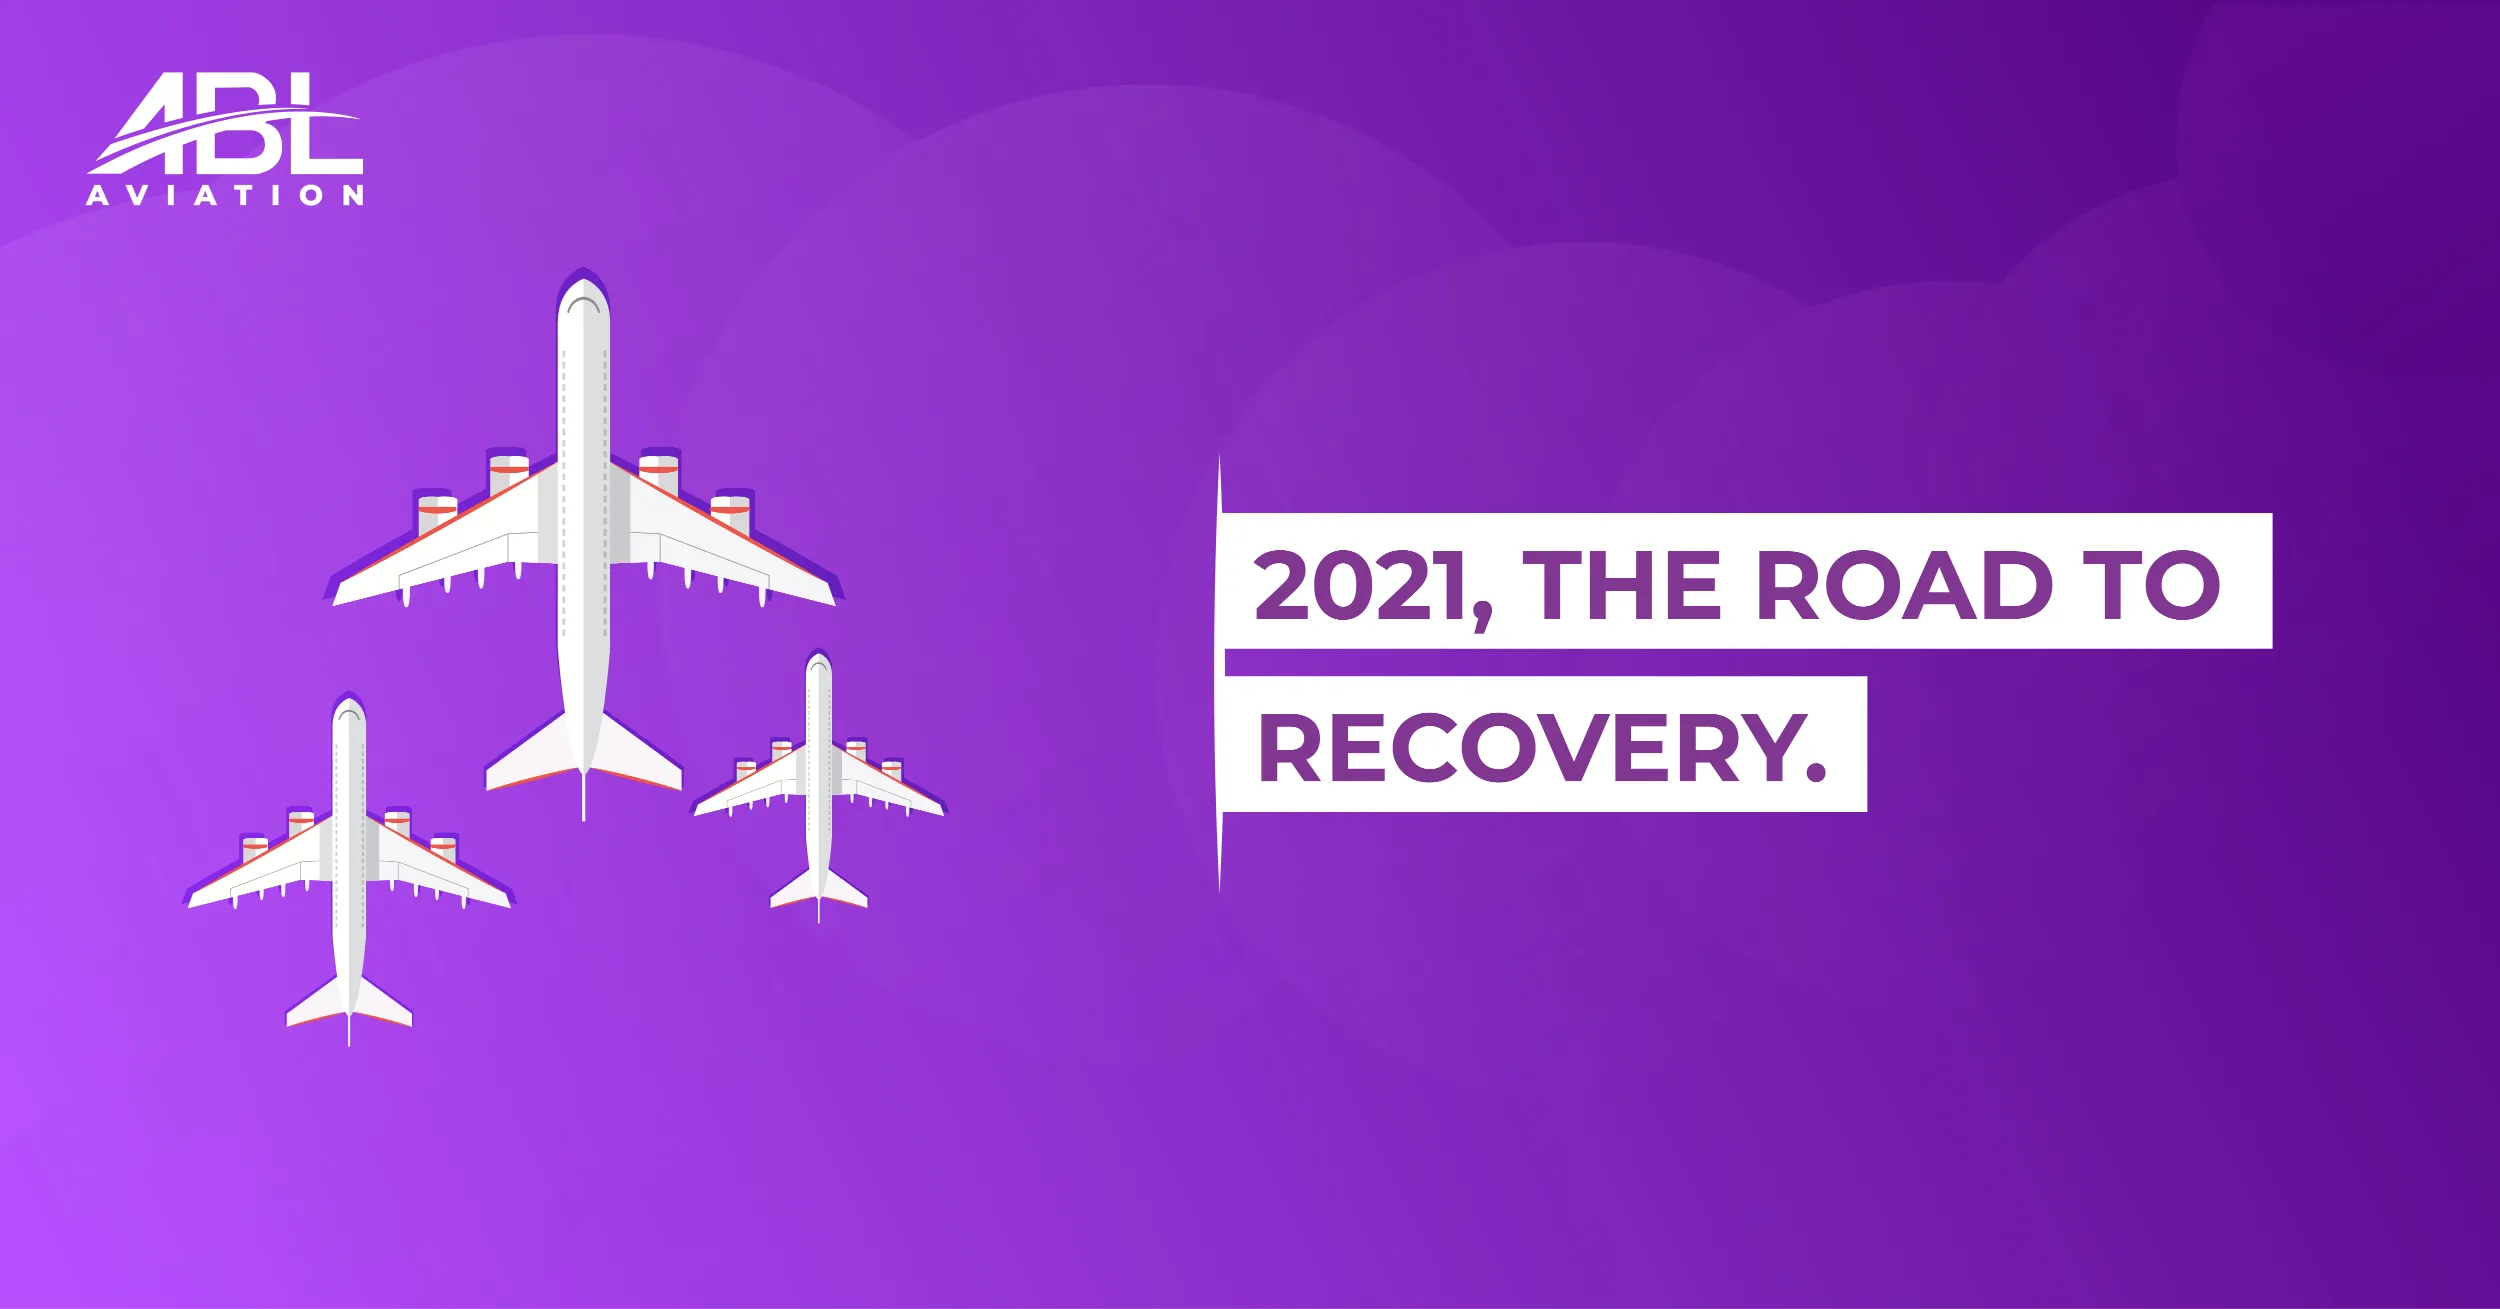 ABL Aviation Releases the March 2021 Insights Report – “2021, The Road to Recovery”